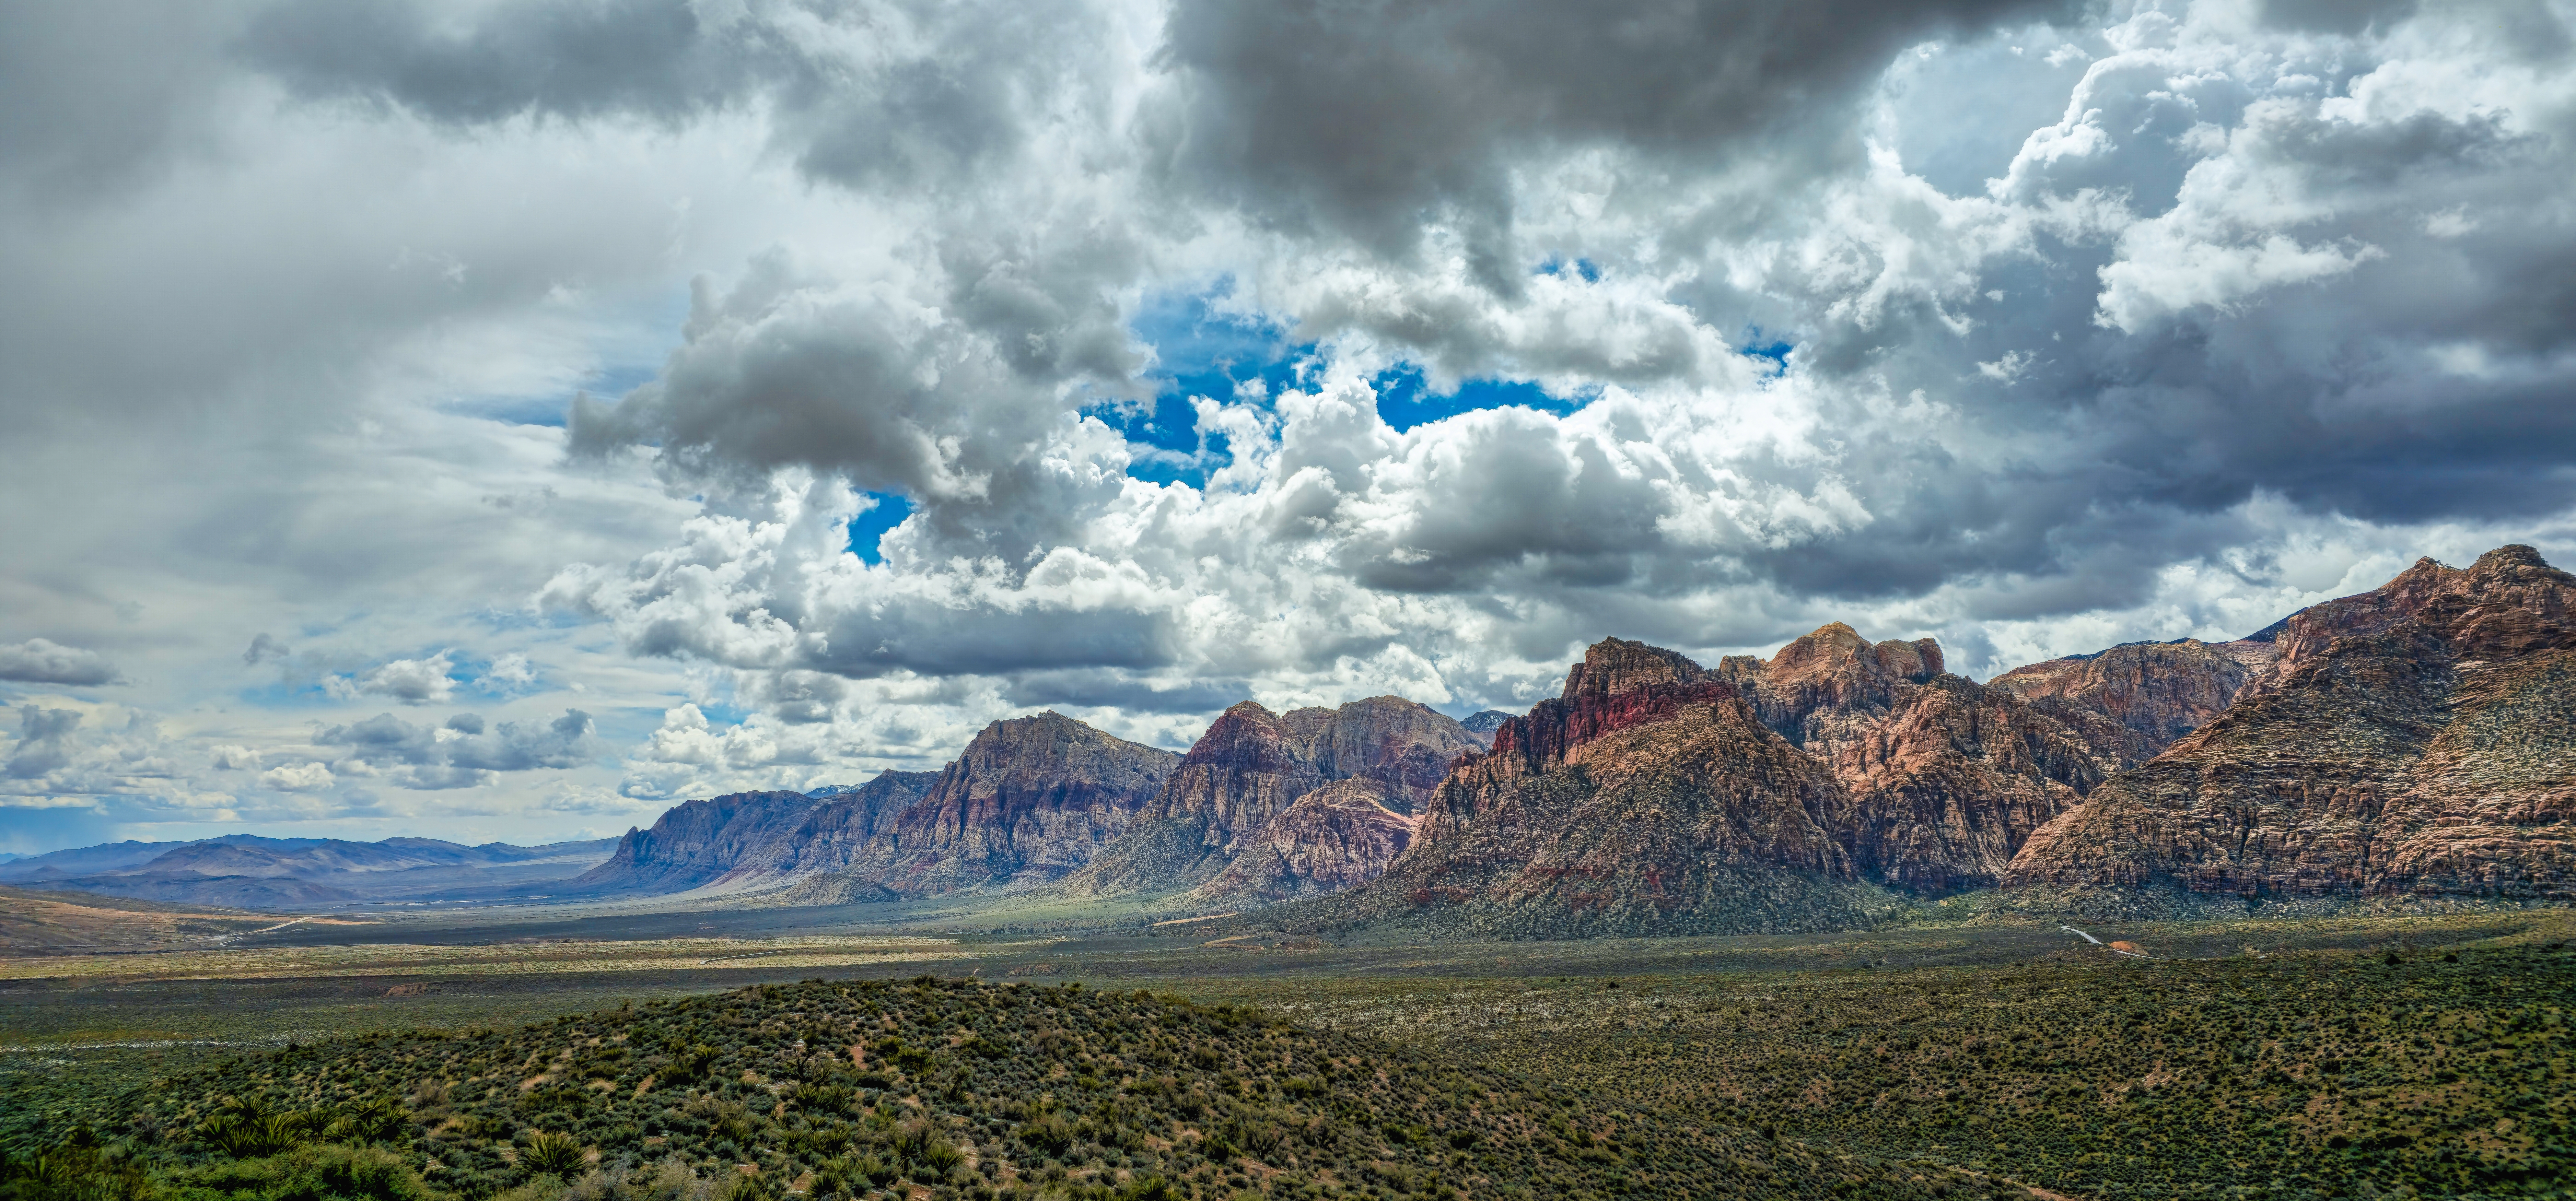 General 7507x3501 Red Rock Canyon Red Rock State Park landscape mountains desert clouds